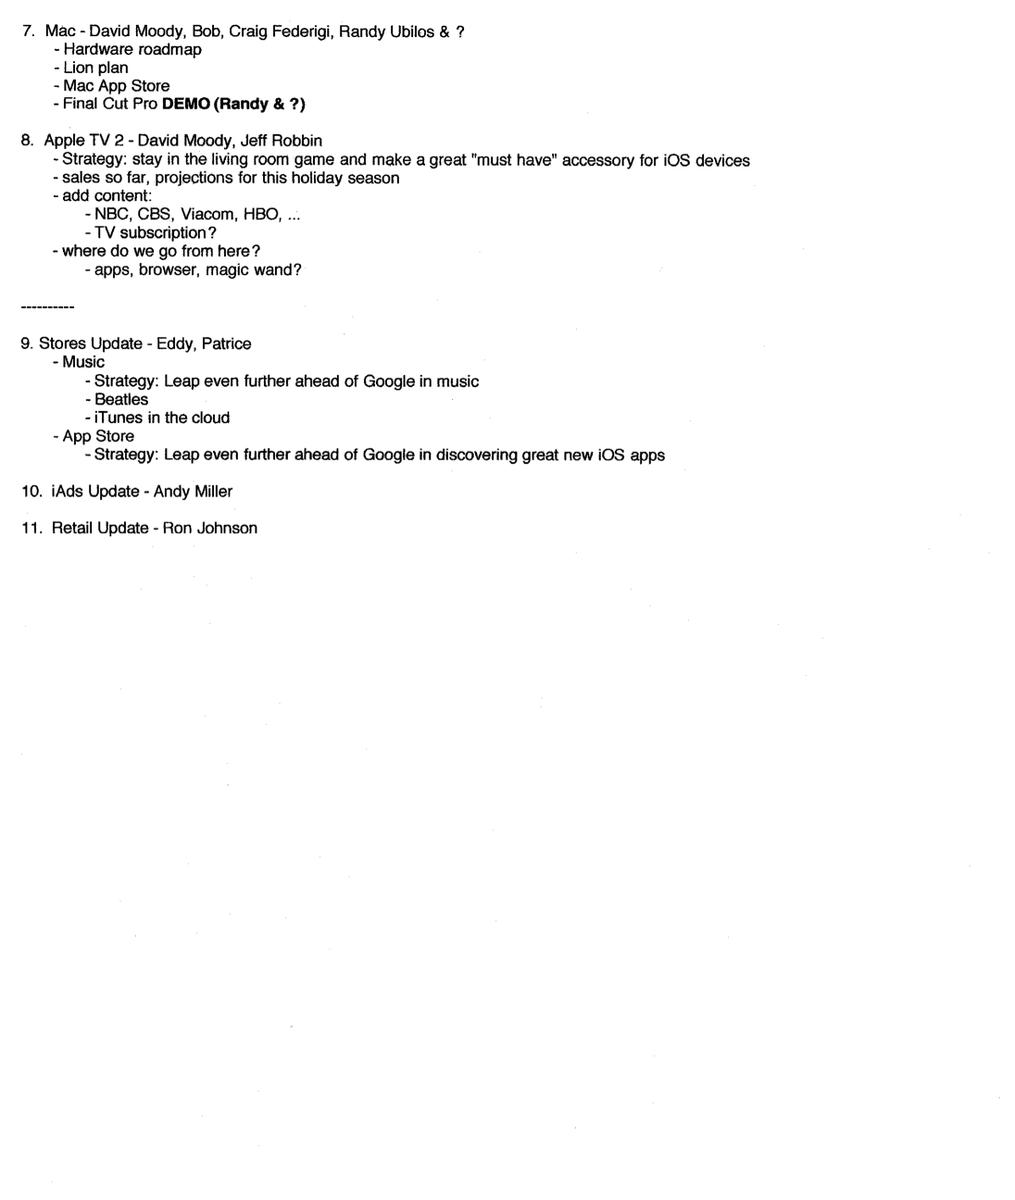 Internal Tech Emails on X: Jawed Karim emails Chad Hurley and Steve Chen:  video idea February 13, 2005  / X